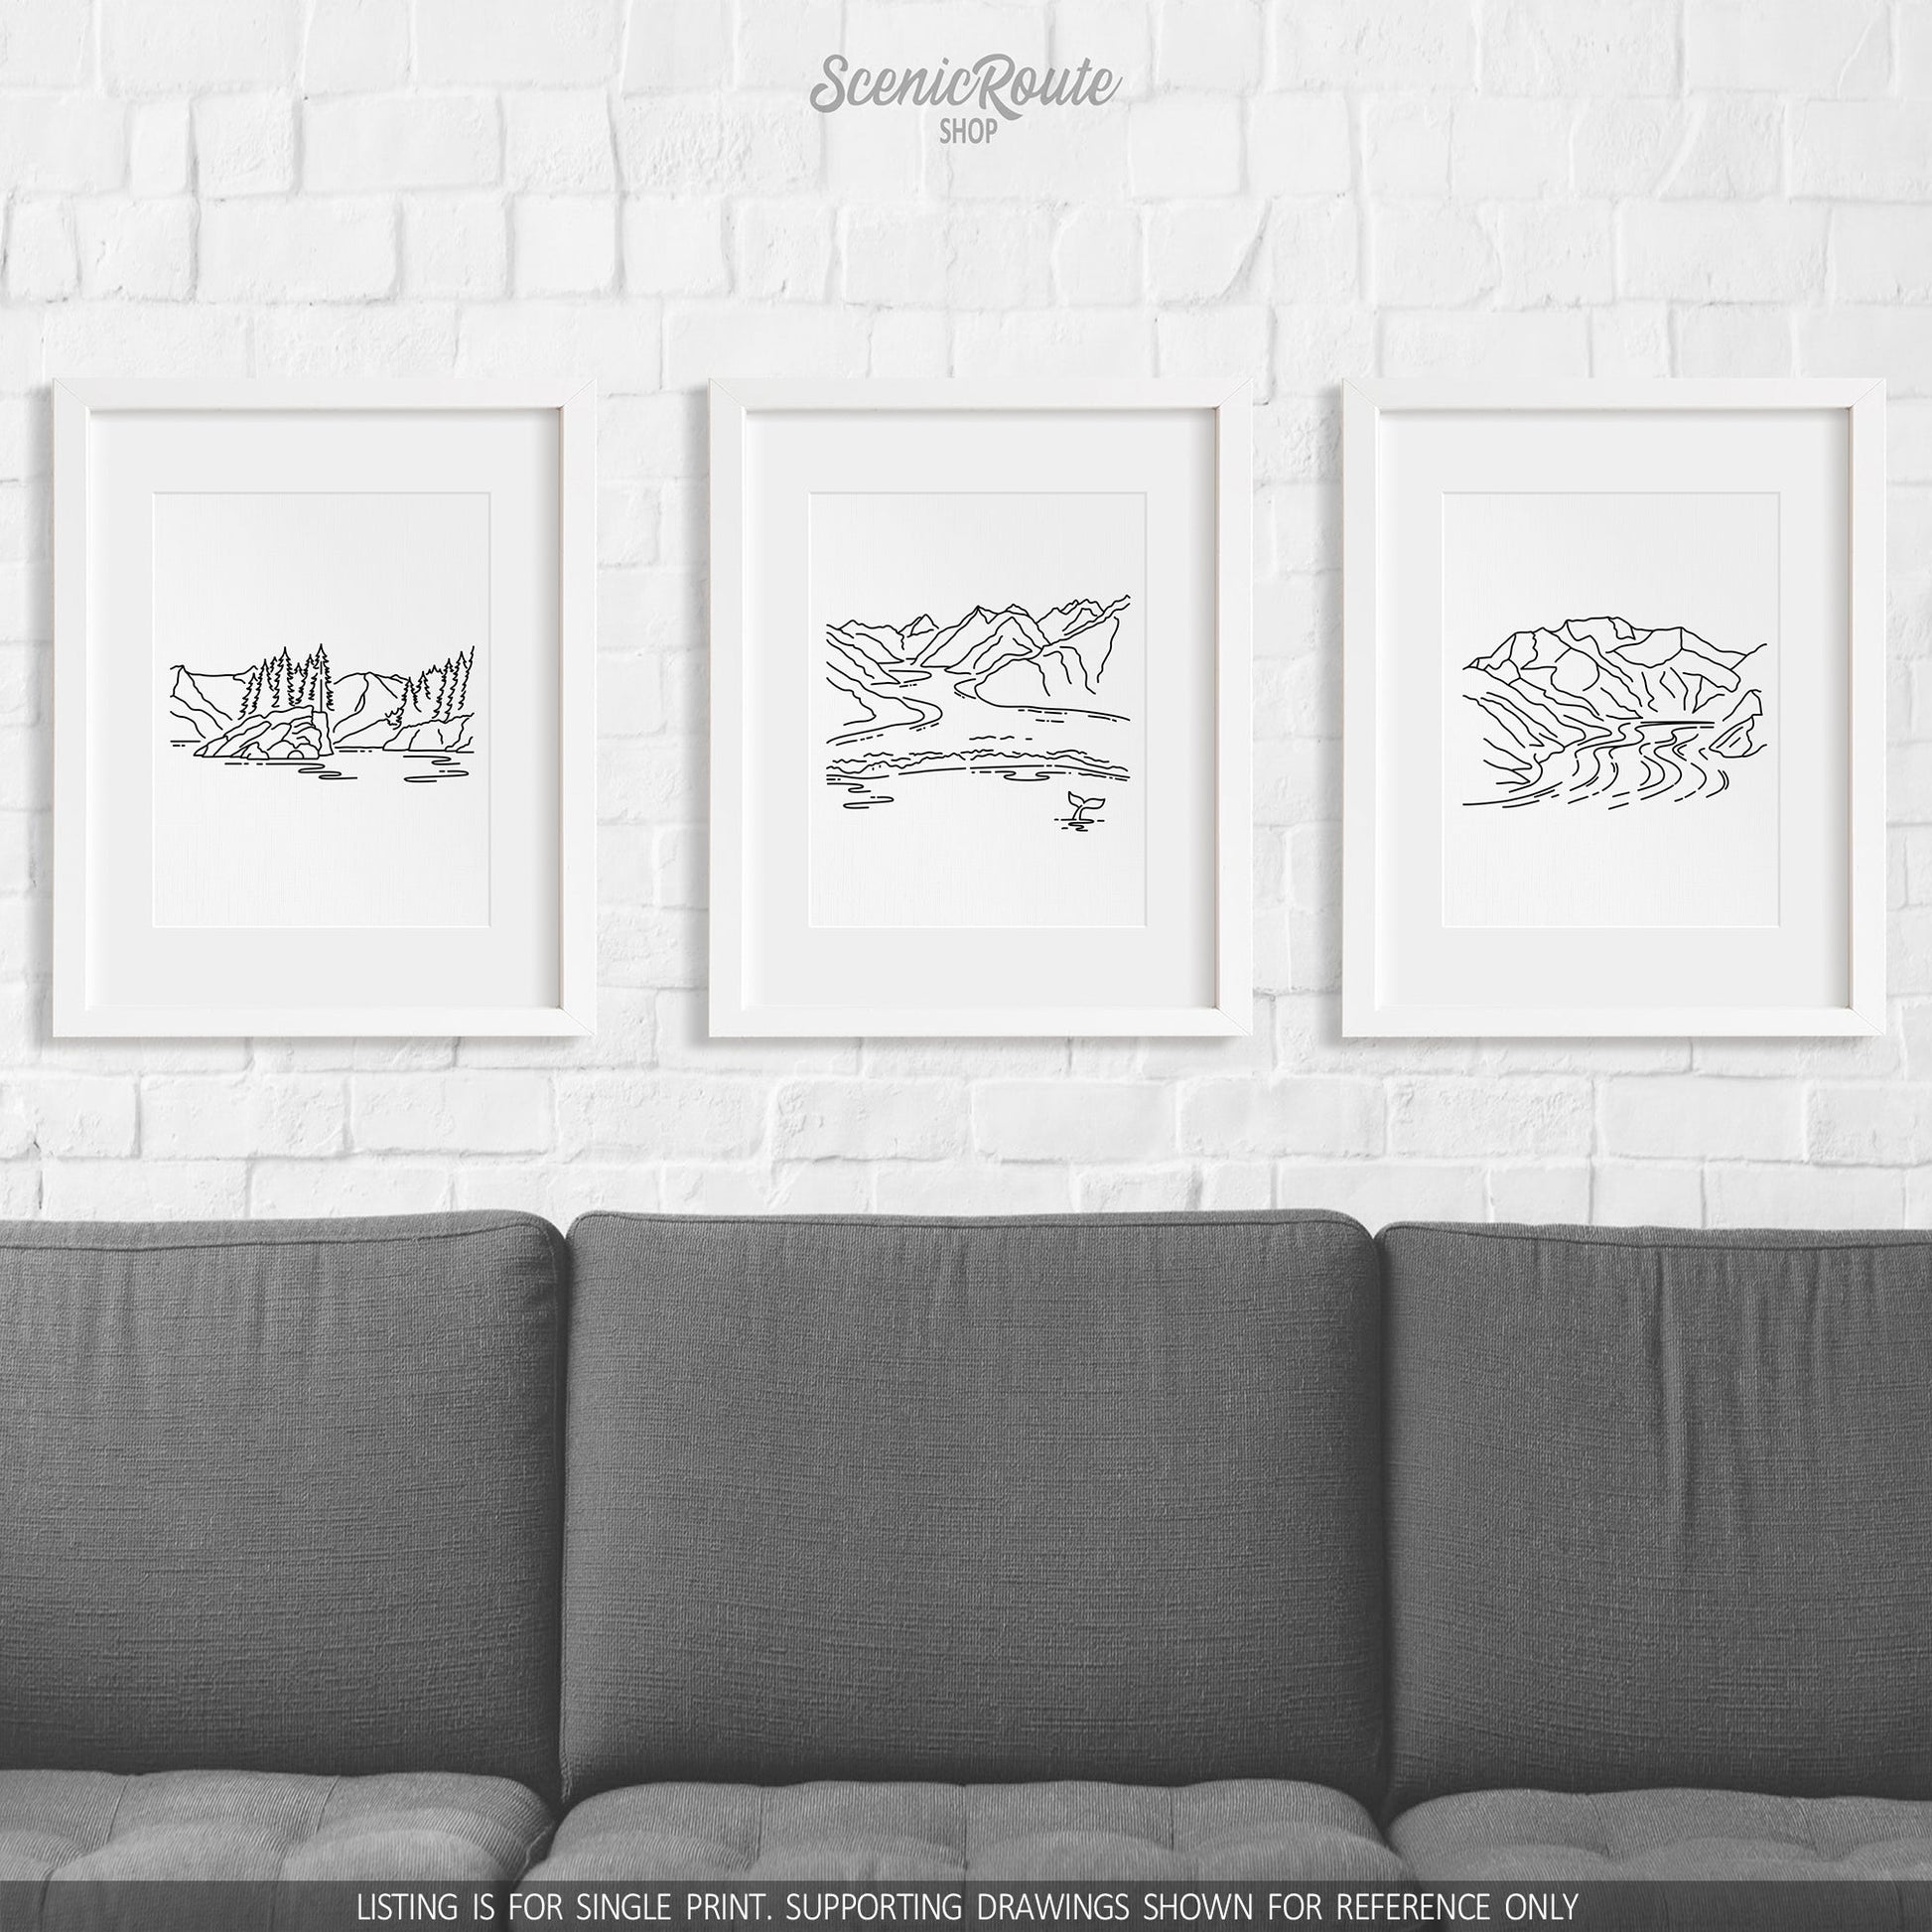 A group of three framed drawings on a wall above a couch. The line art drawings include Kenai Fjords National Park, Glacier Bay National Park, and Wrangell Saint Elias National Park